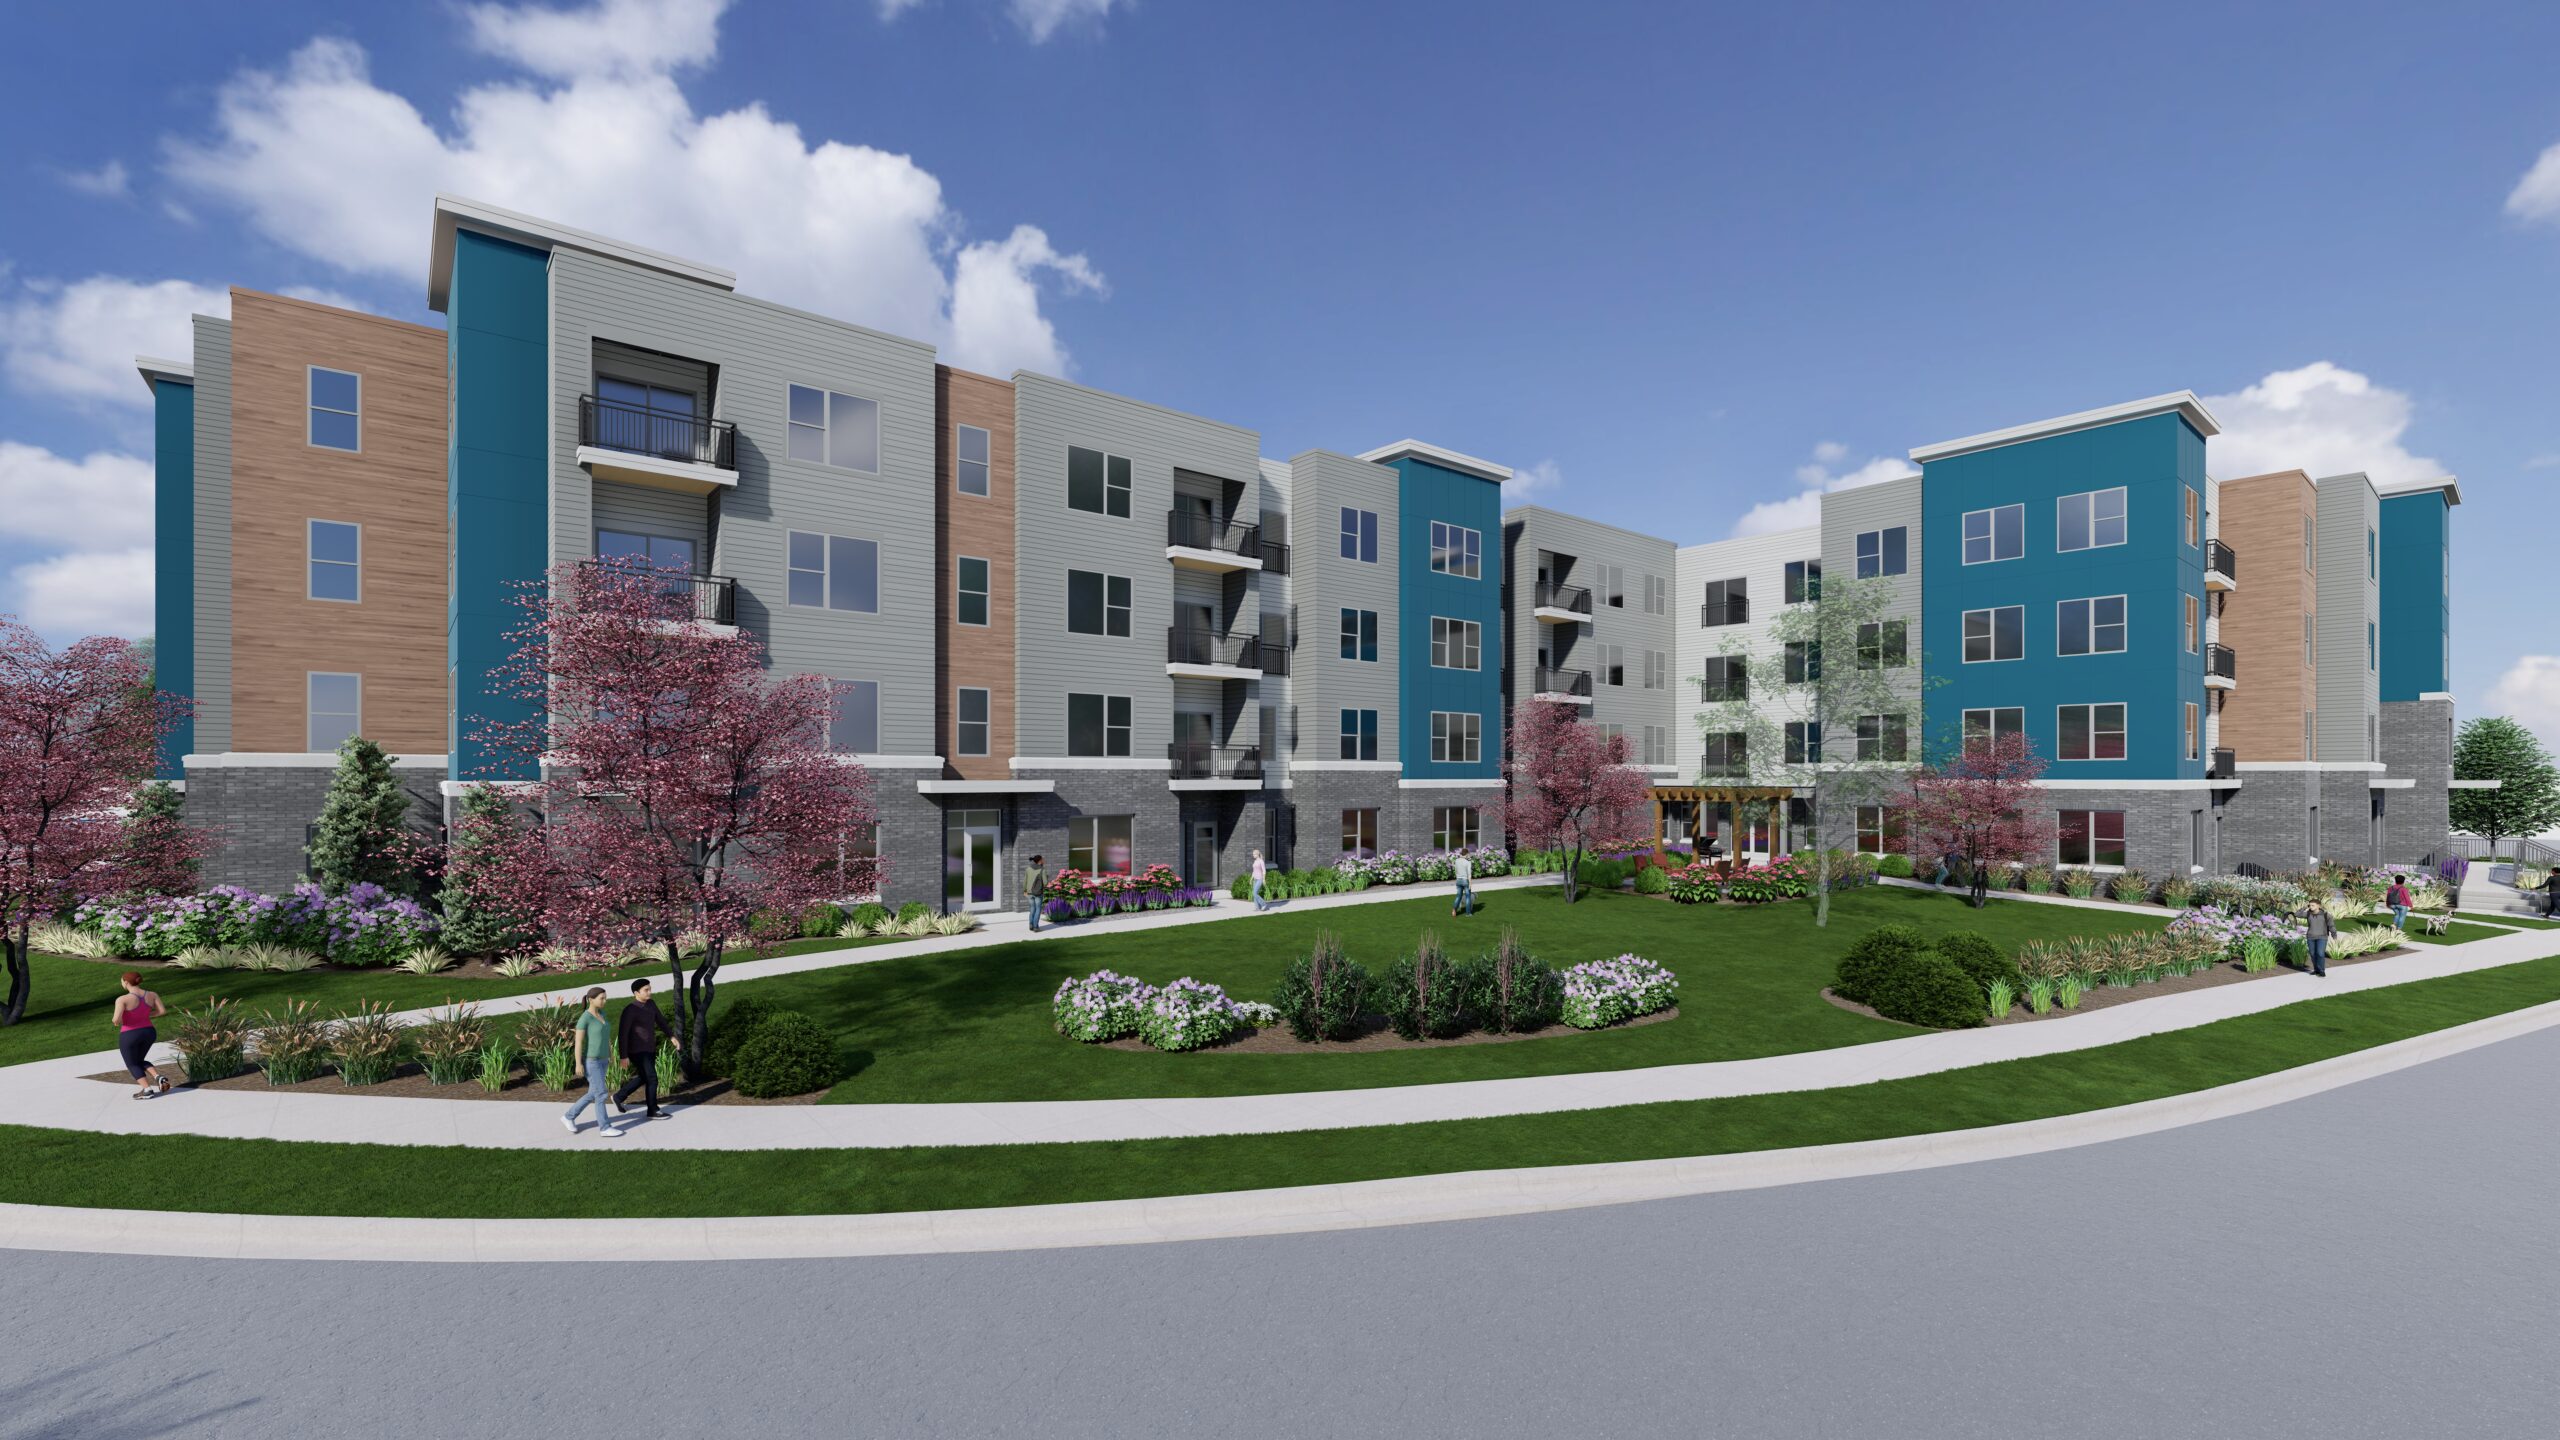 McShane Selected to Build Affordable Housing in Madison, Wisconsin